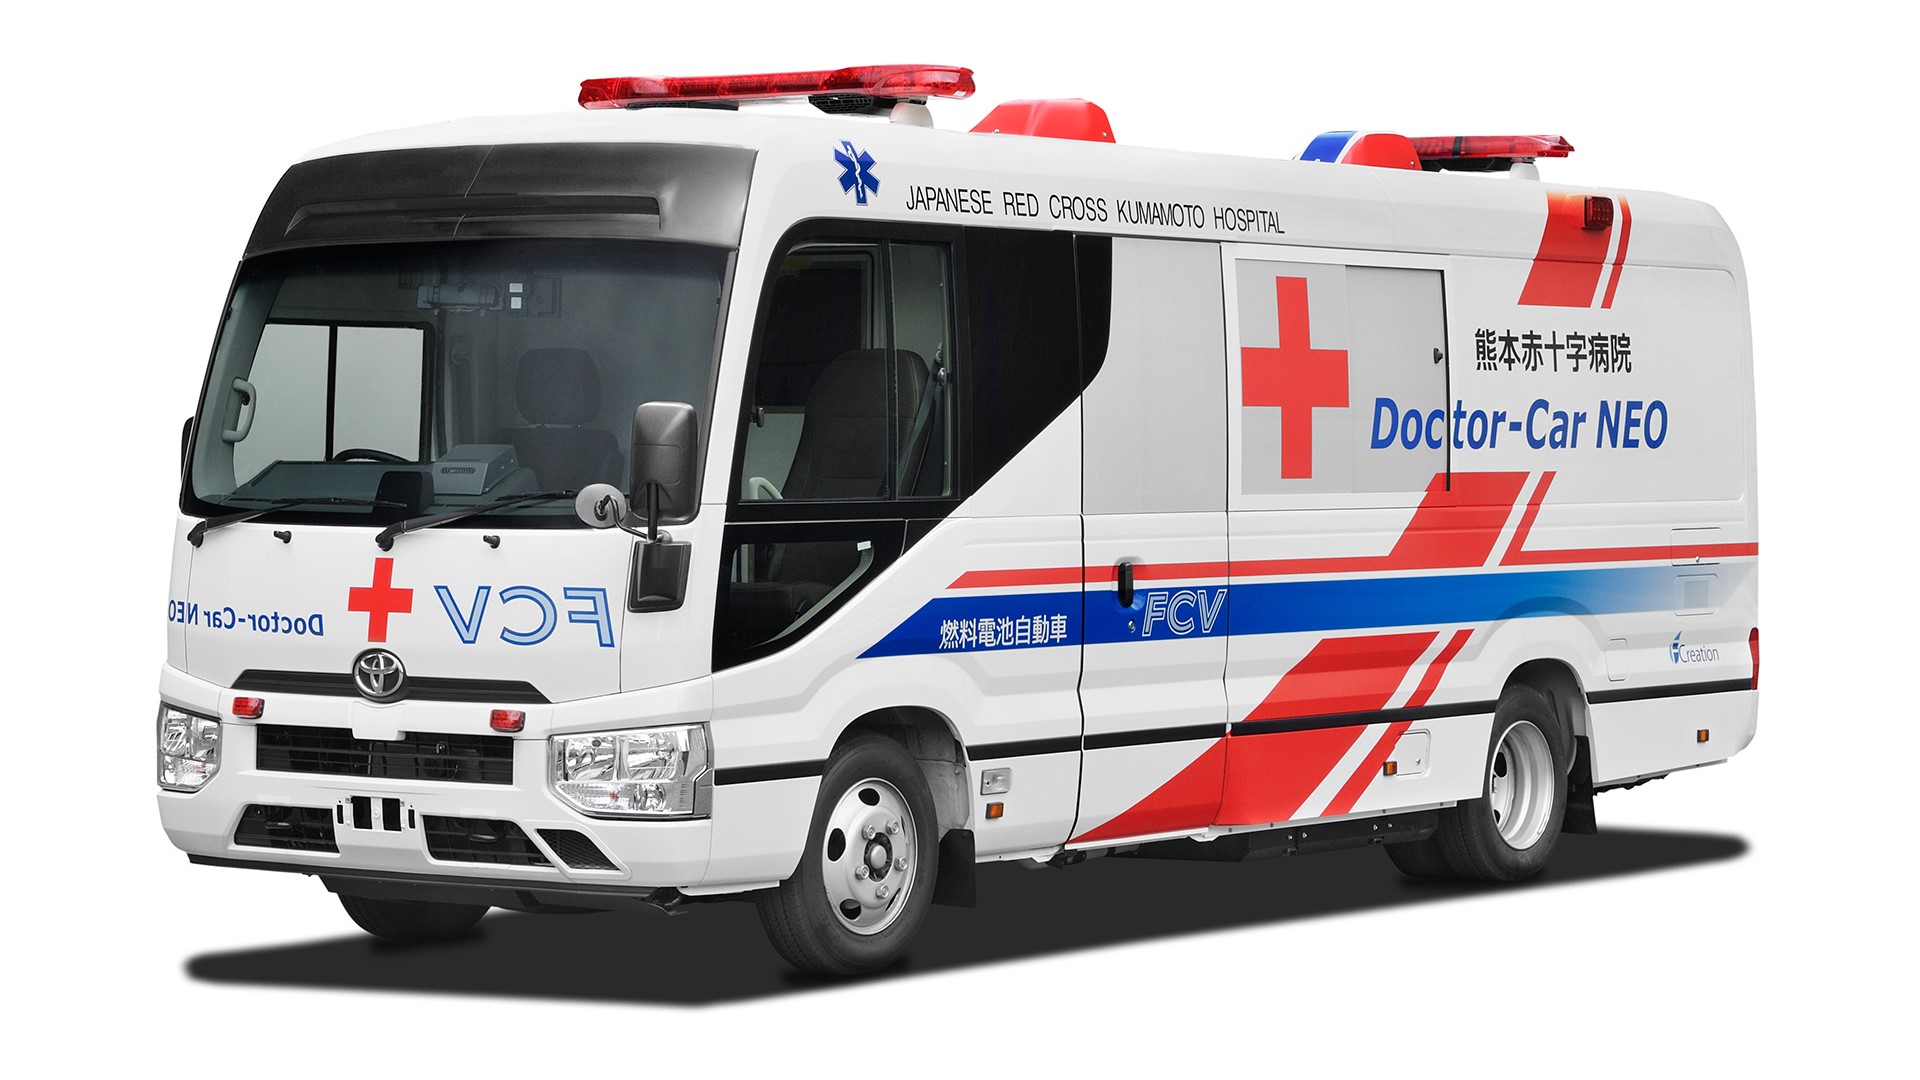 Toyota designs mobile clinic for disaster relief and response